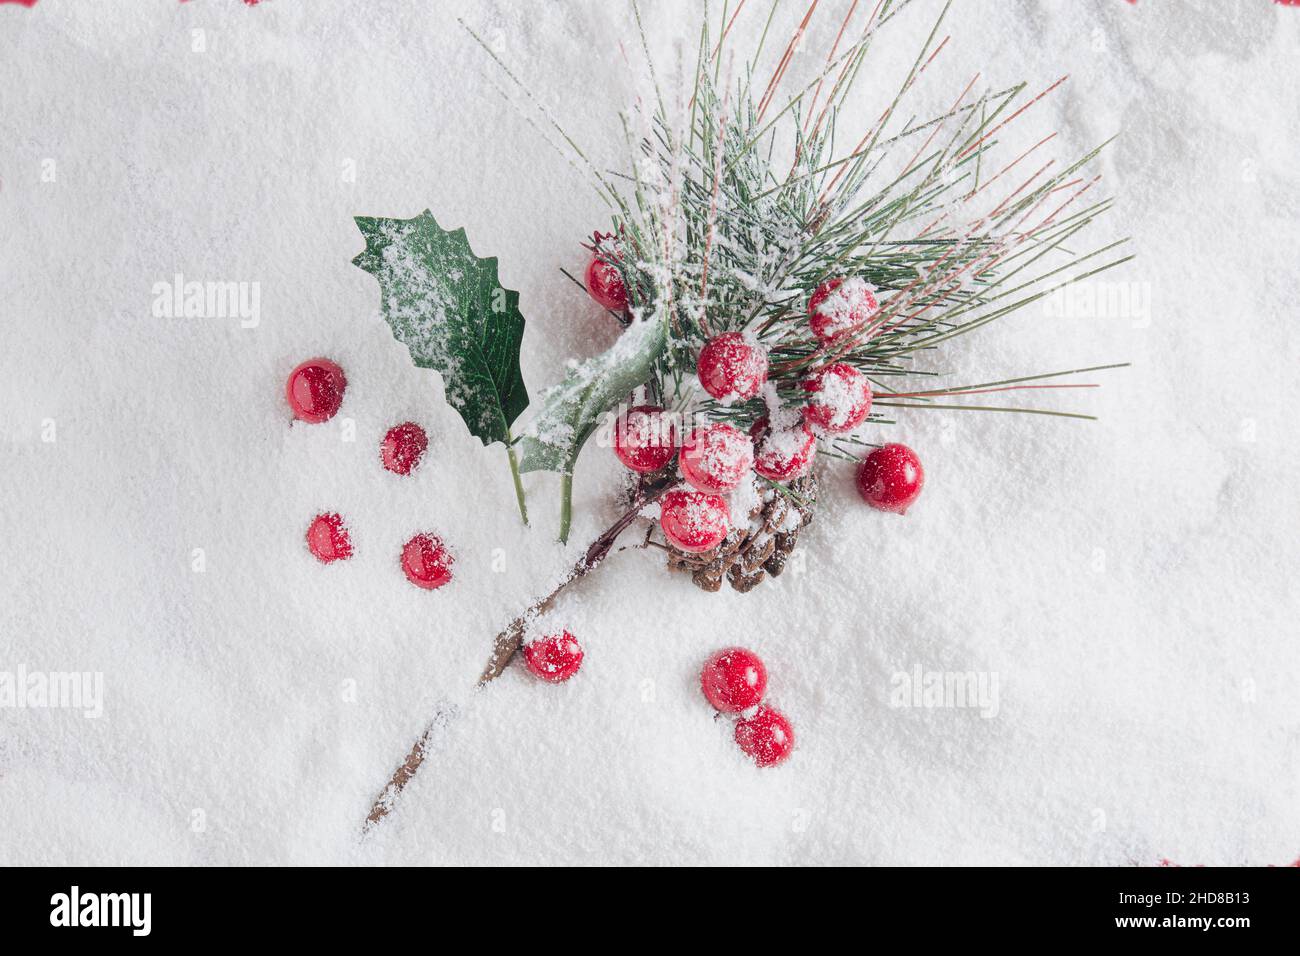 Holly plant covered with white snow with red berries. Flat lay nature concept. Stock Photo